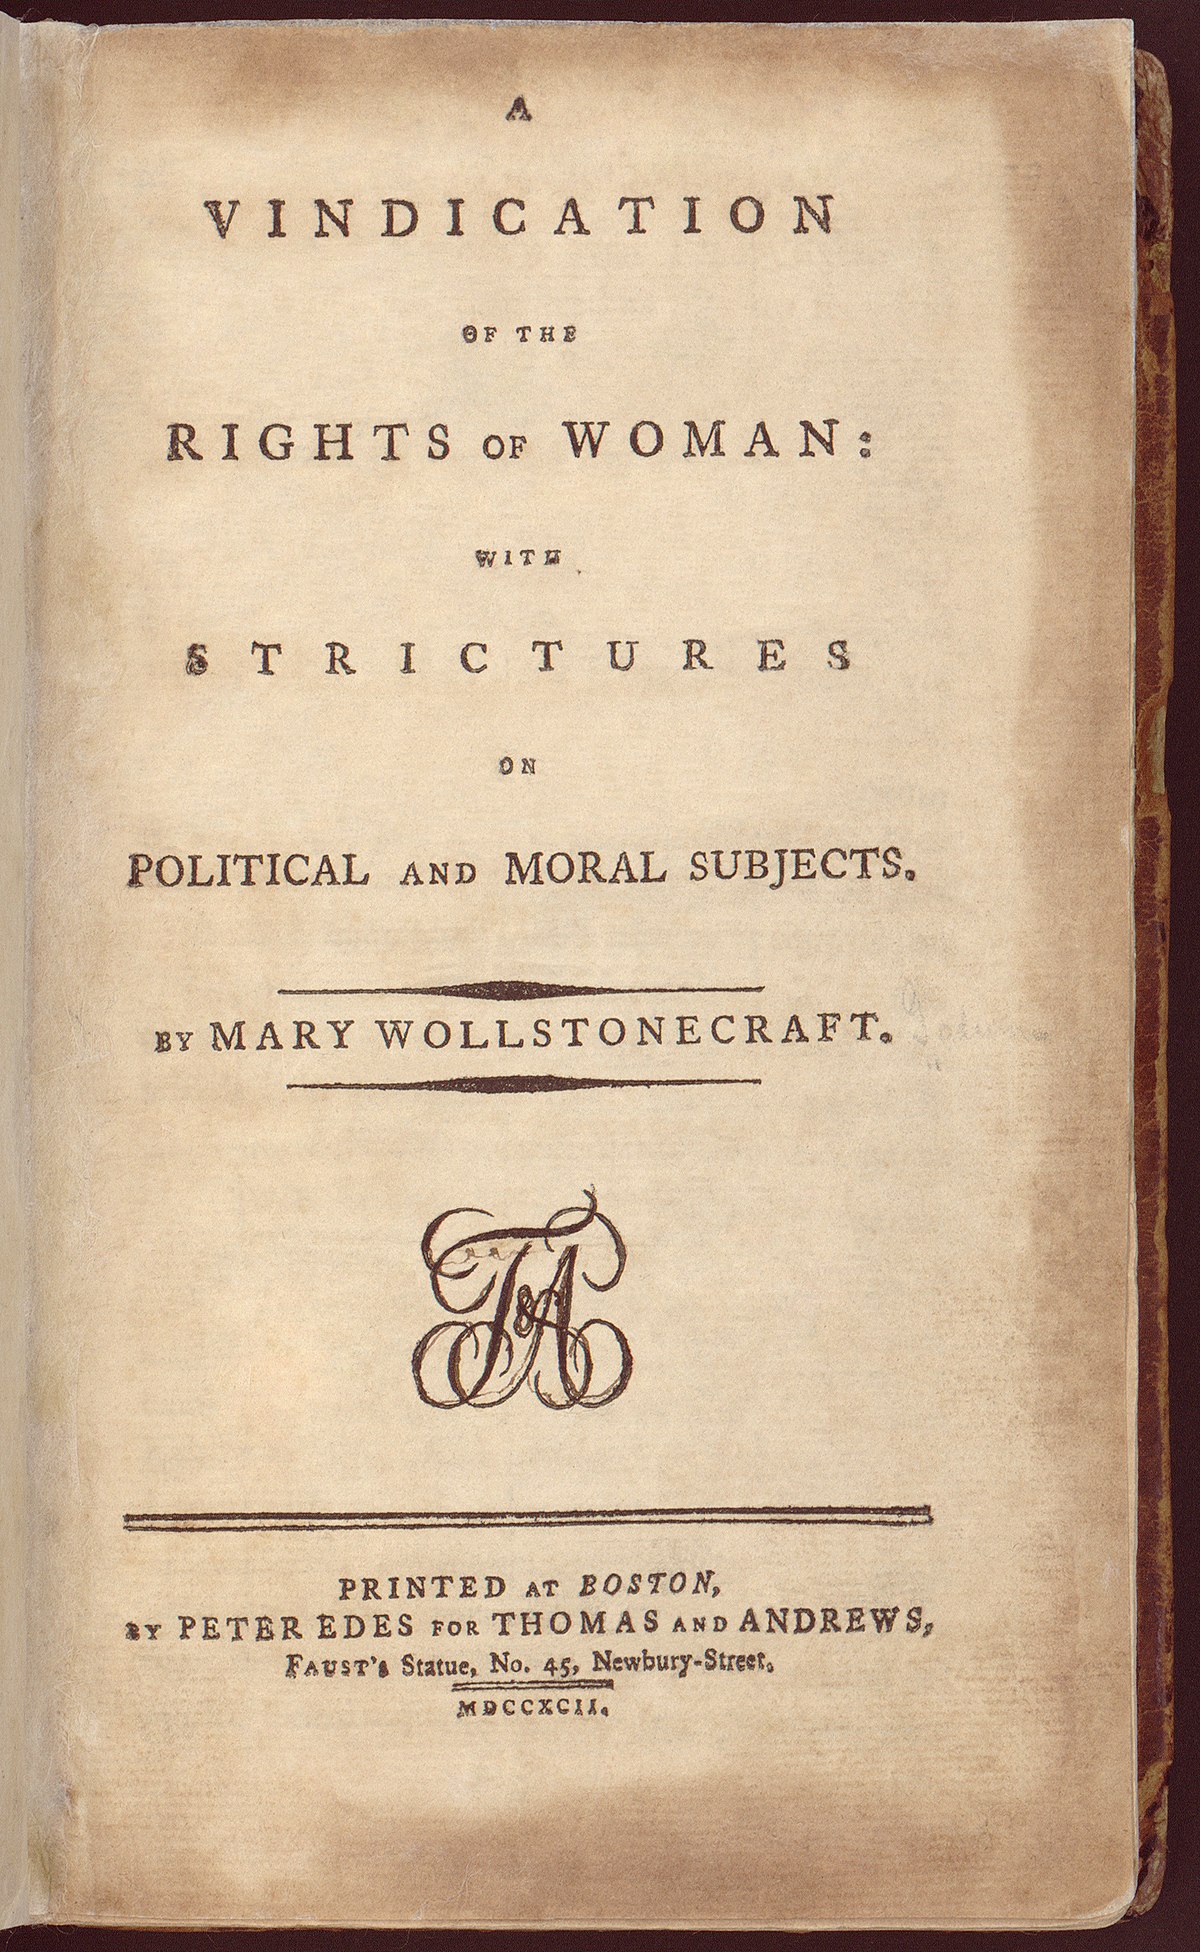 A Vindication of the Rights of Woman: With Strictures on Political and Moral Subjects